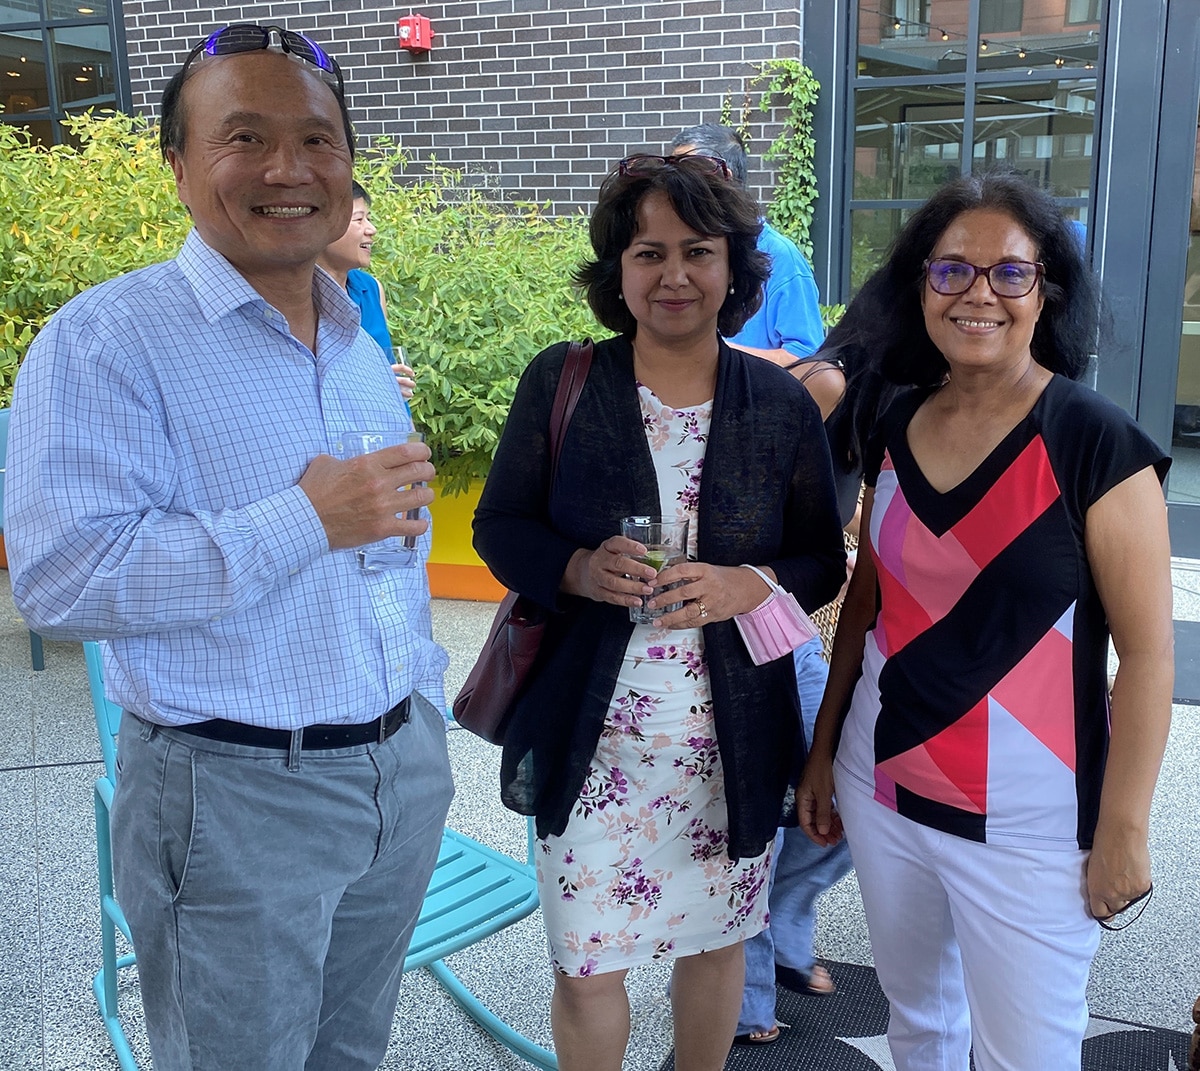 NIH staff socializing at a summer event